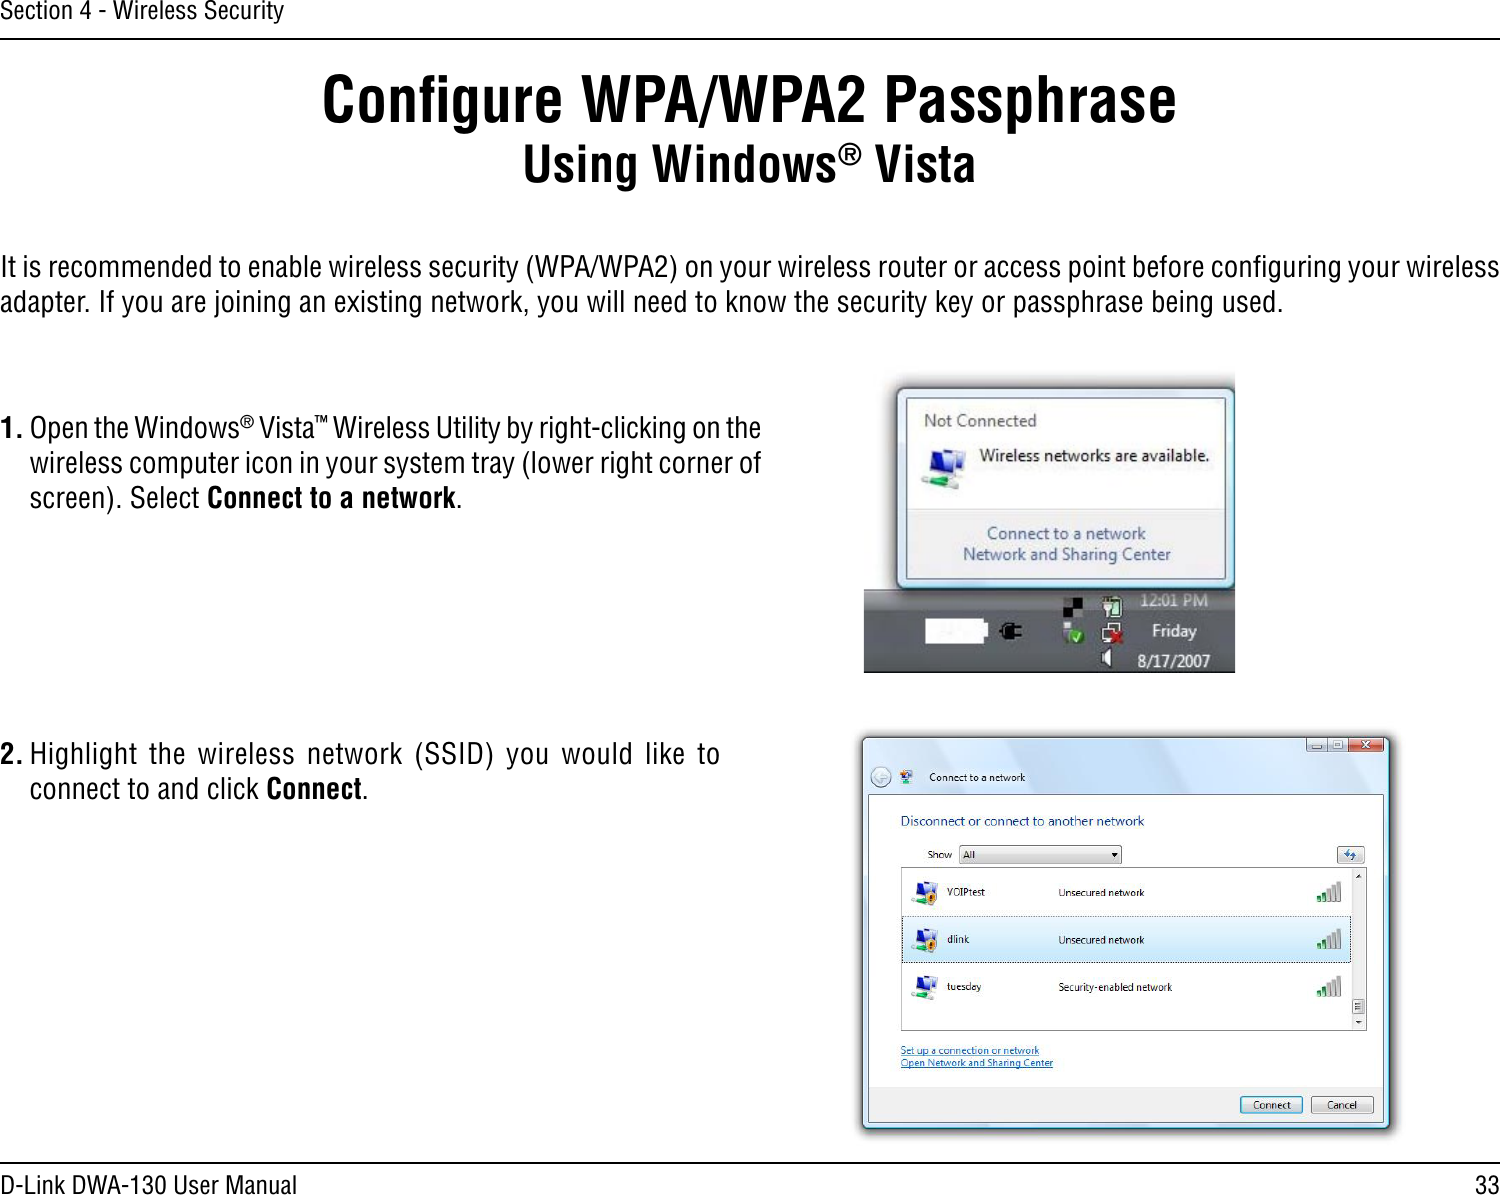 33D-Link DWA-130 User ManualSection 4 - Wireless SecurityConﬁgure WPA/WPA2 PassphraseUsing Windows® VistaIt is recommended to enable wireless security (WPA/WPA2) on your wireless router or access point before conﬁguring your wireless adapter. If you are joining an existing network, you will need to know the security key or passphrase being used.2. Highlight the  wireless  network  (SSID)  you  would  like  to connect to and click Connect.1. Open the Windows® Vista™ Wireless Utility by right-clicking on the wireless computer icon in your system tray (lower right corner of screen). Select Connect to a network. 